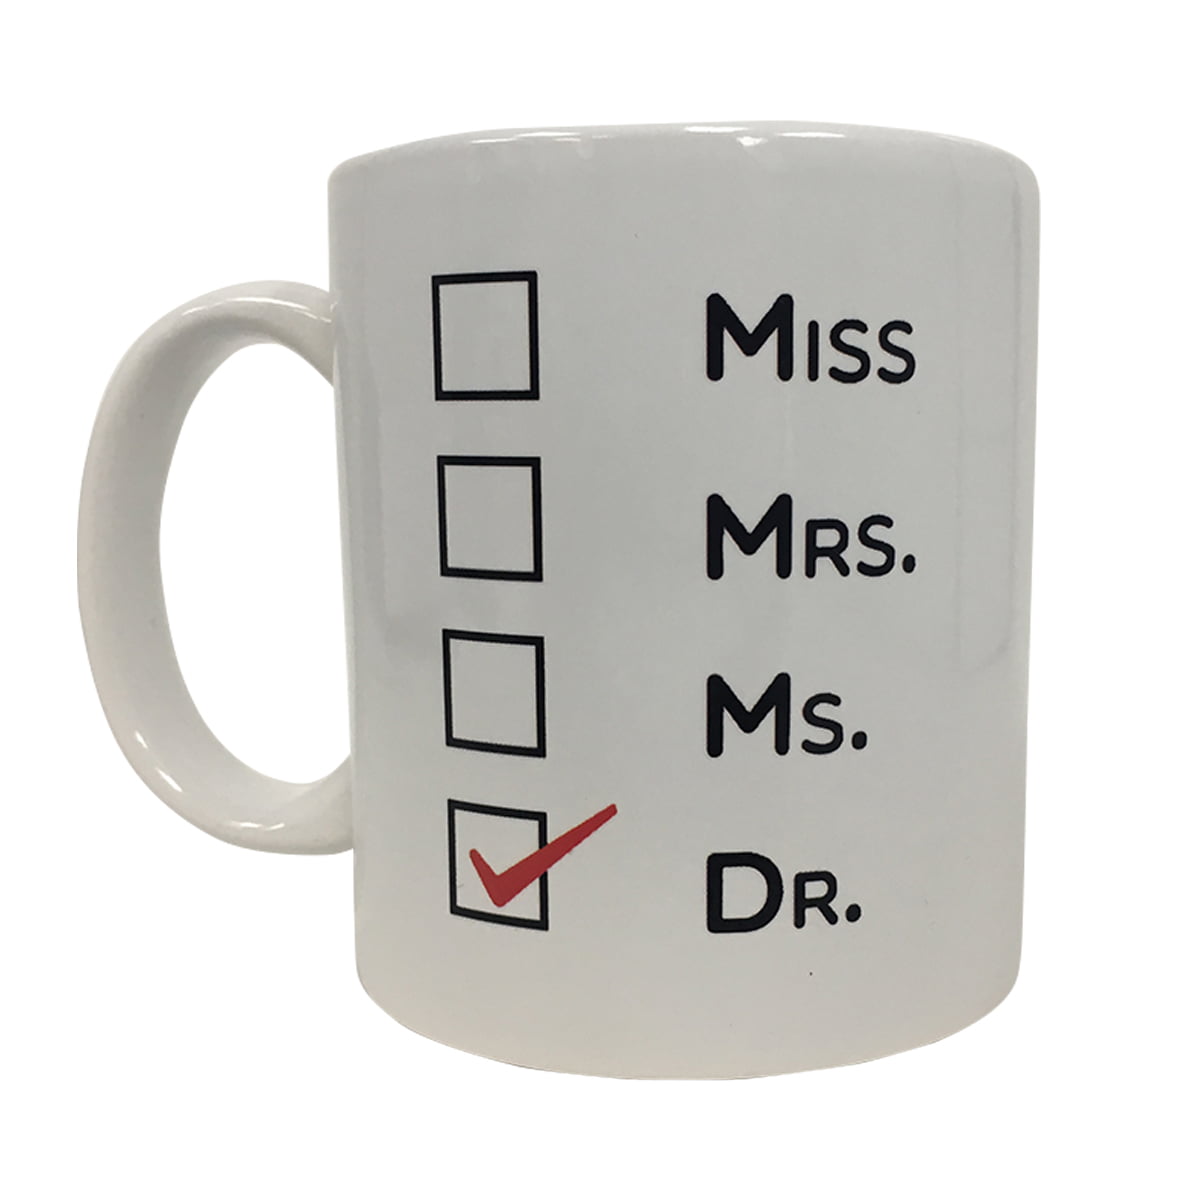 Funny Cup Woman Female Gift Idea Ms Doctor Checkbox Coffee Mug Miss Mrs Dr 